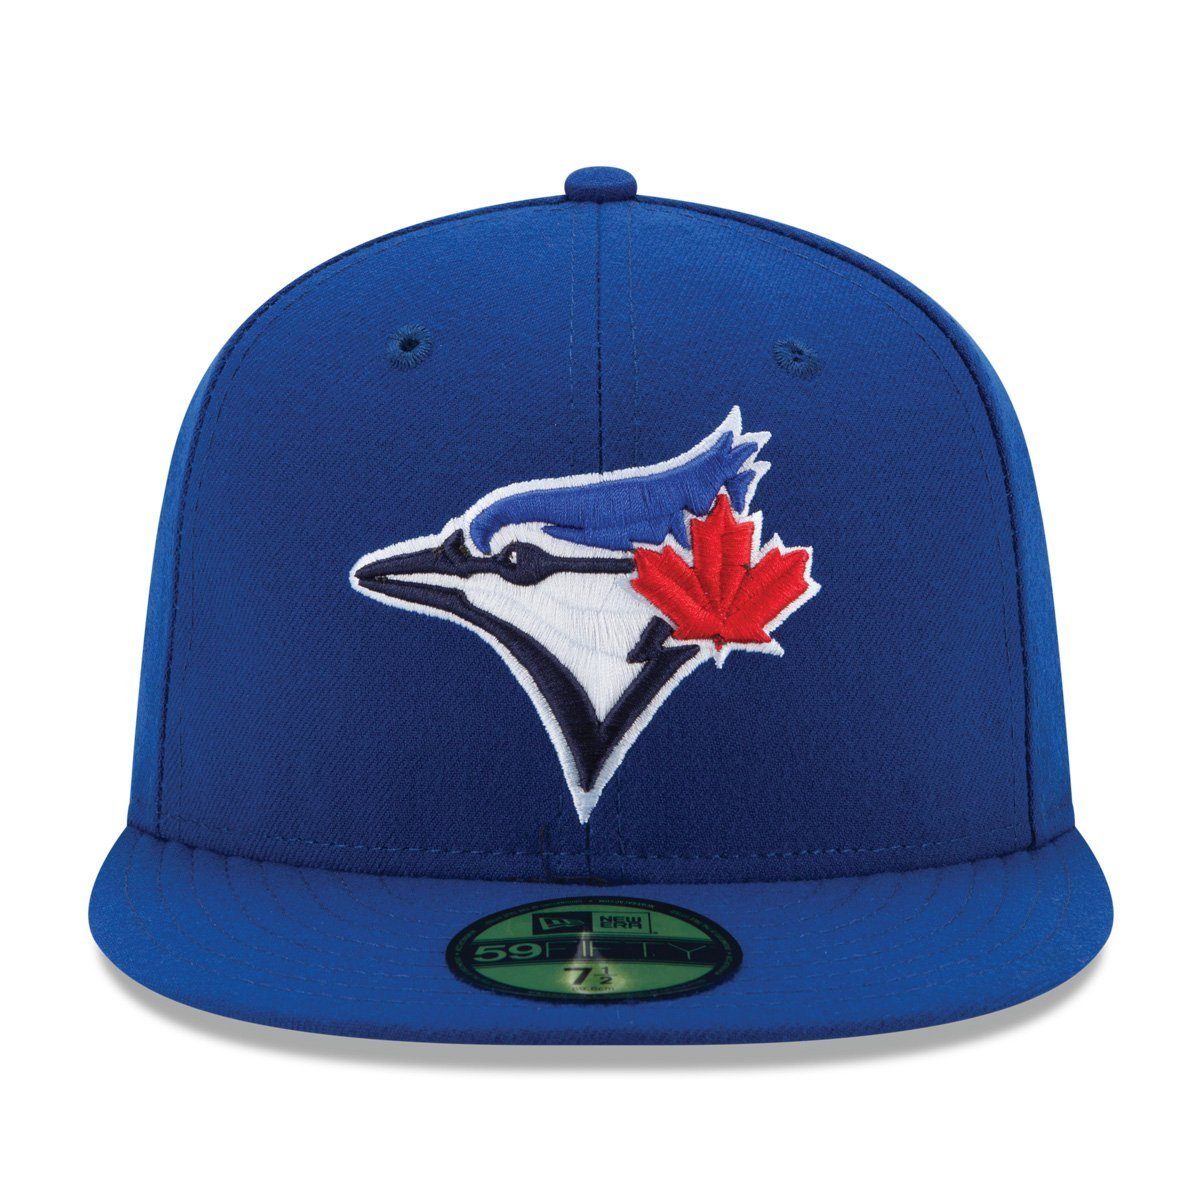 Jays ONFIELD AUTHENTIC New Era Toronto Cap Fitted 59Fifty